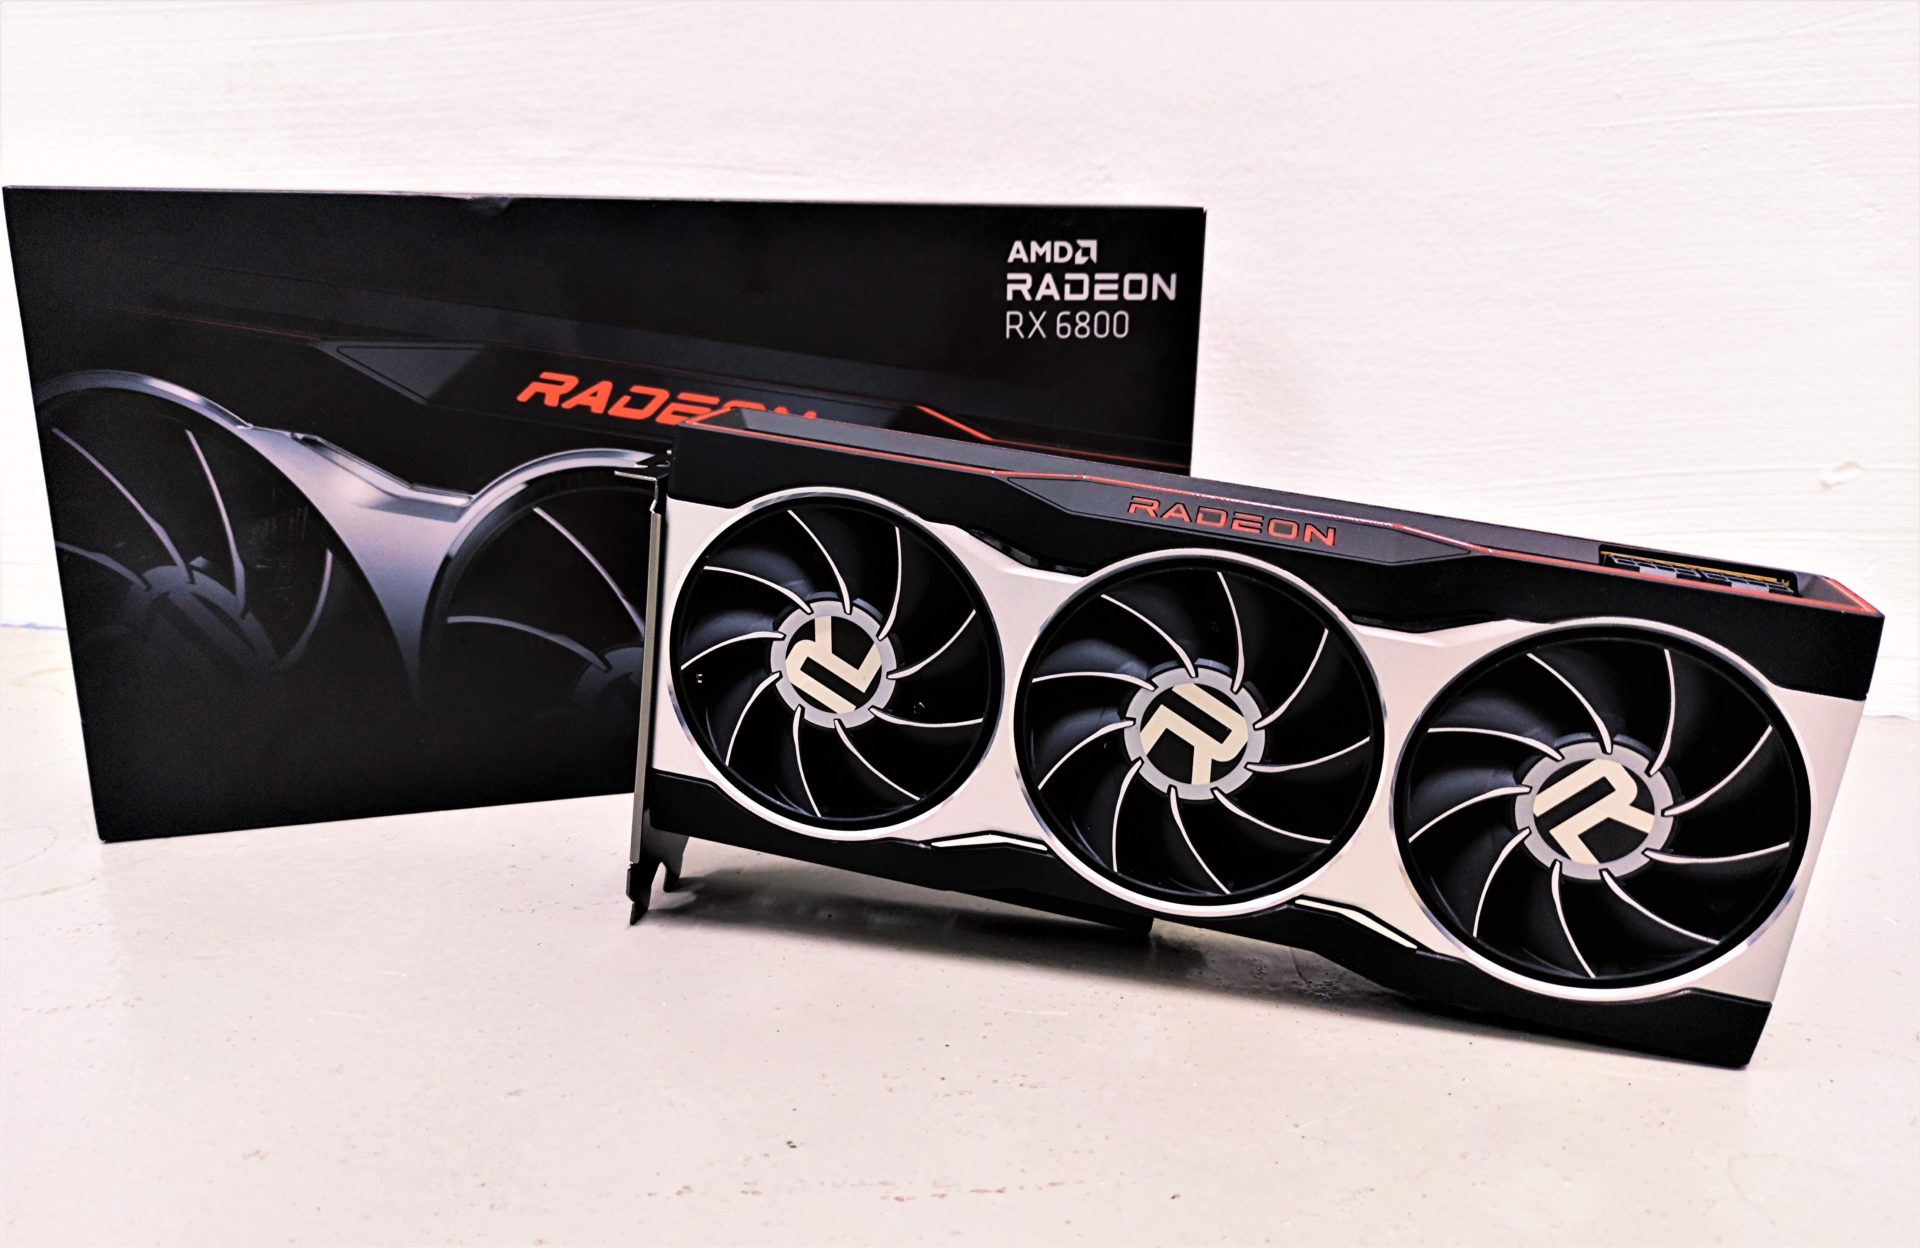 AMD announces the Radeon RX 6800 XT gaming GPU and claims a win